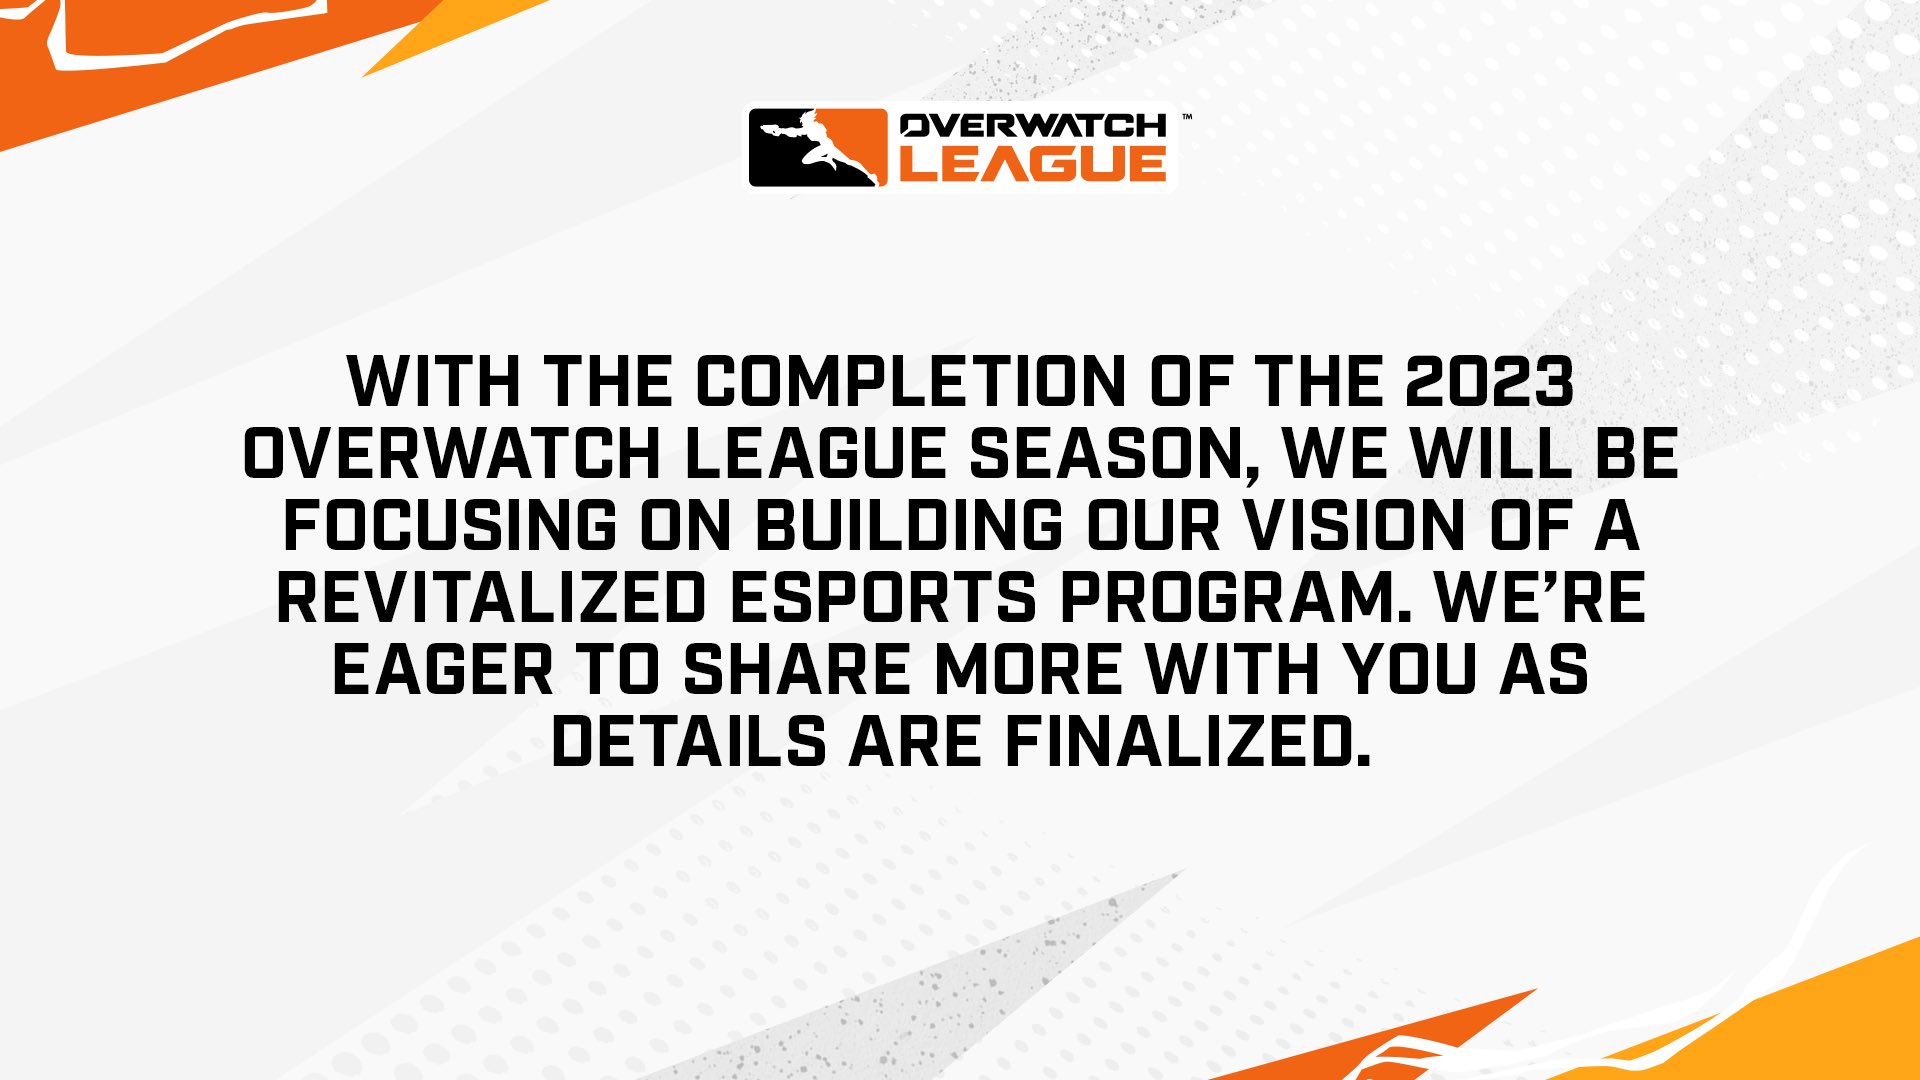 With the completion of the 2023 Overwatch League season, we will be focusing on building our vision of a revitalized esports program. We're eager to share more with you as details are finalized.